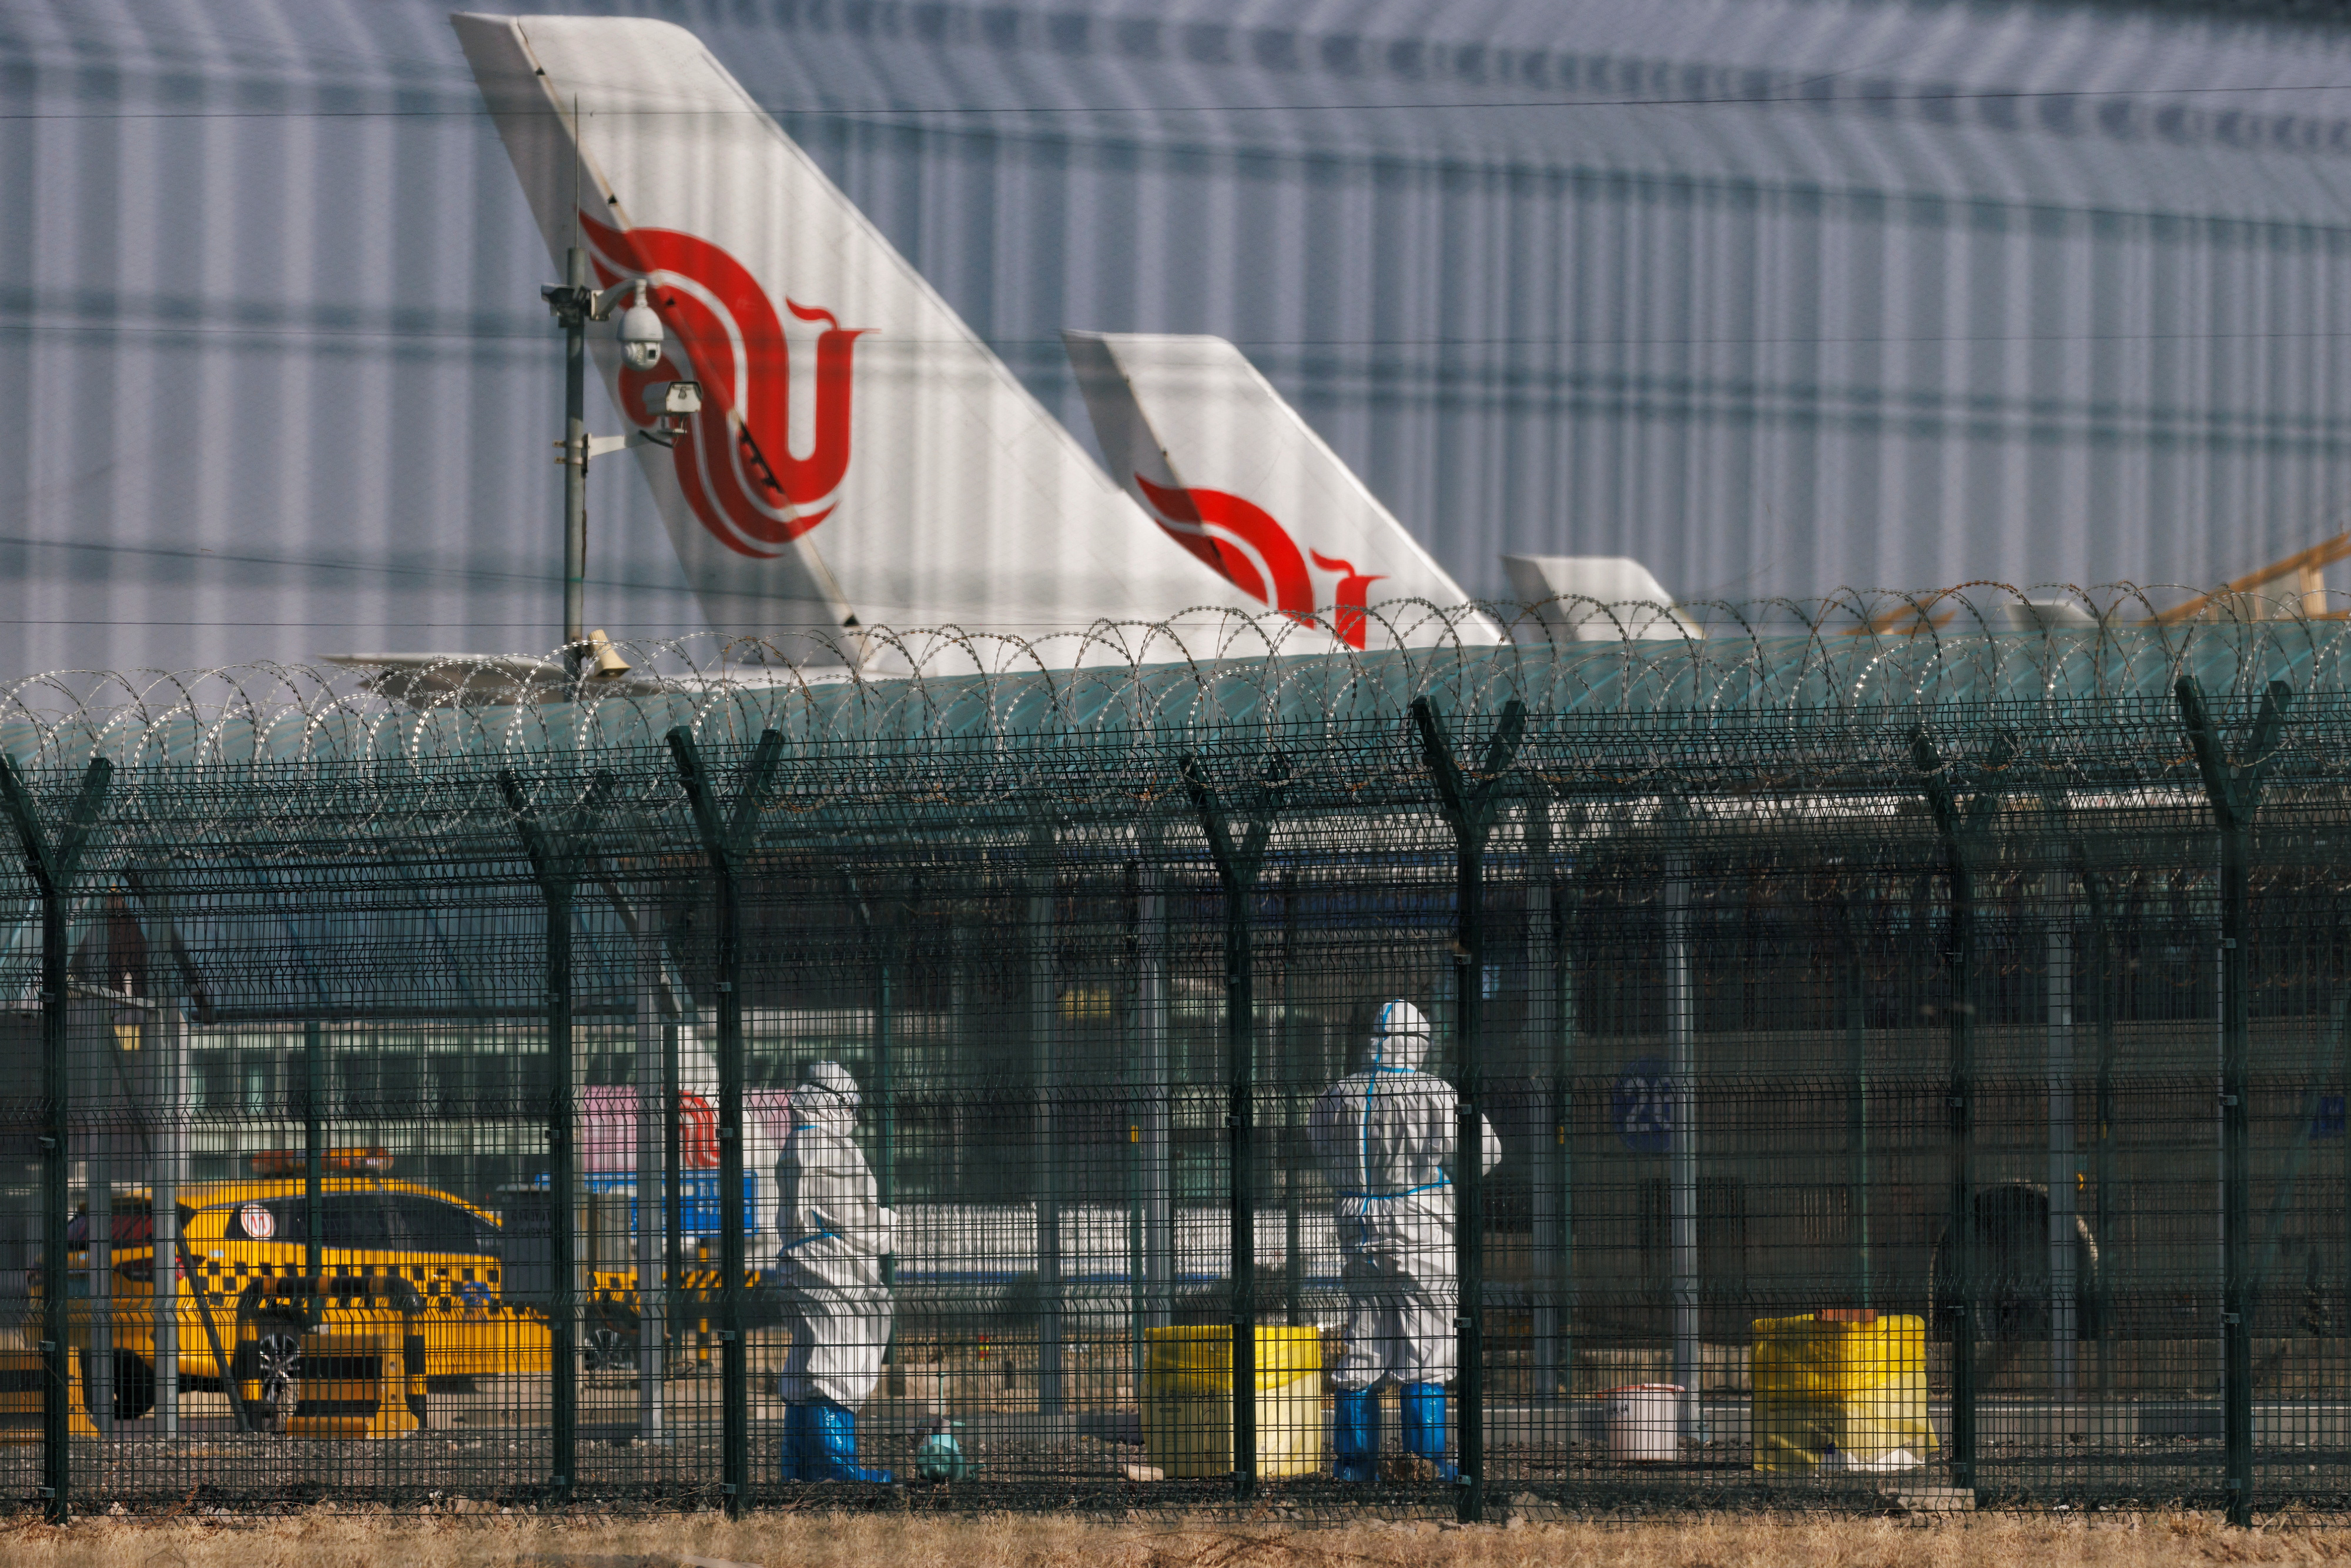 Workers in protective suits stand near planes of Air China airlines at Beijing Capital International Airport as coronavirus disease (COVID-19) outbreaks continue in Beijing